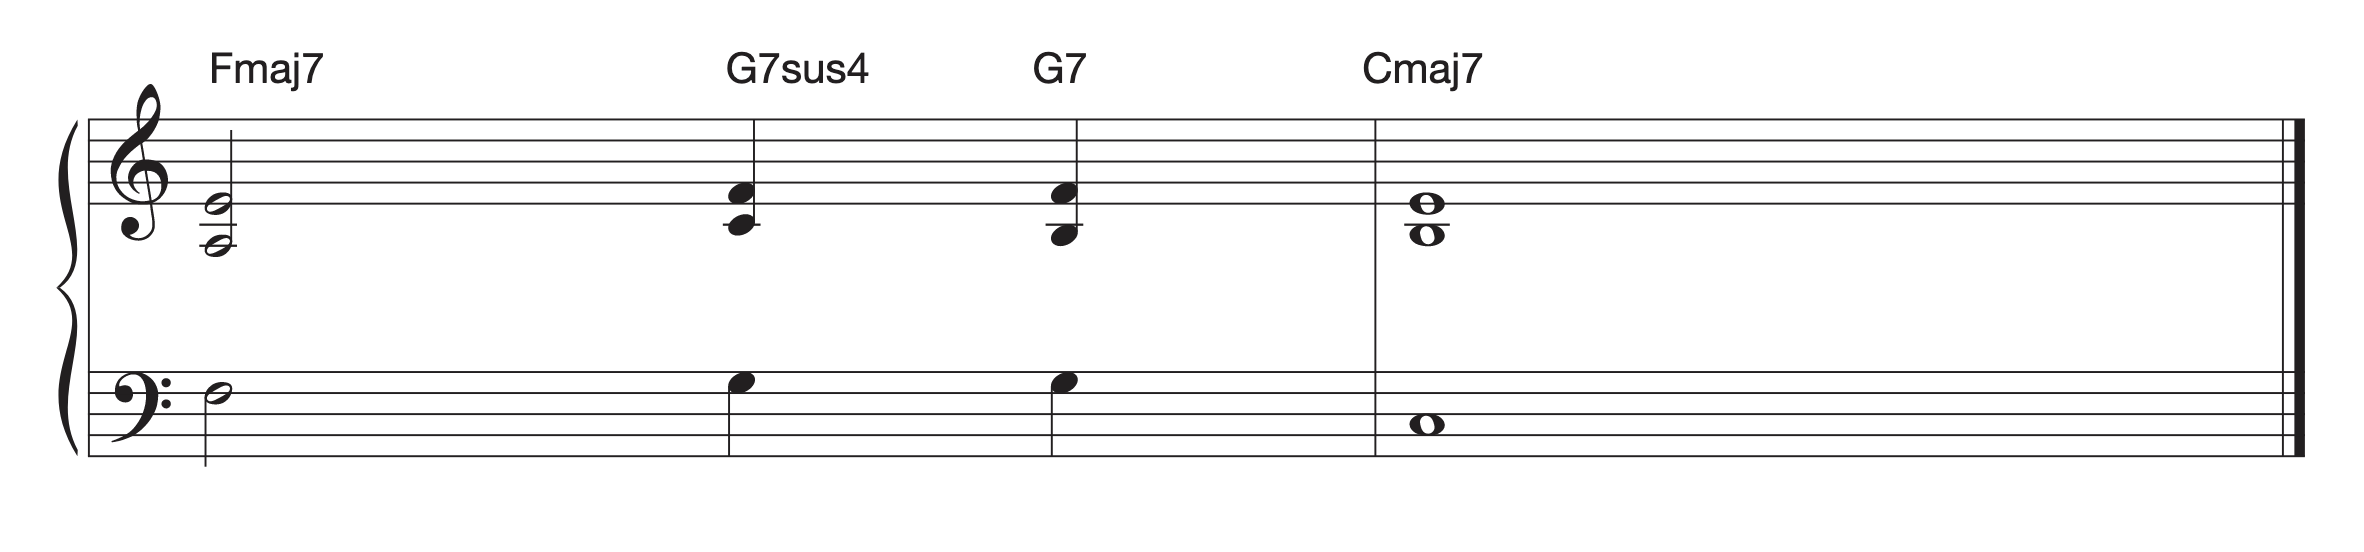 Music notation shows guide tones, voice led, for four-note chordal structures.